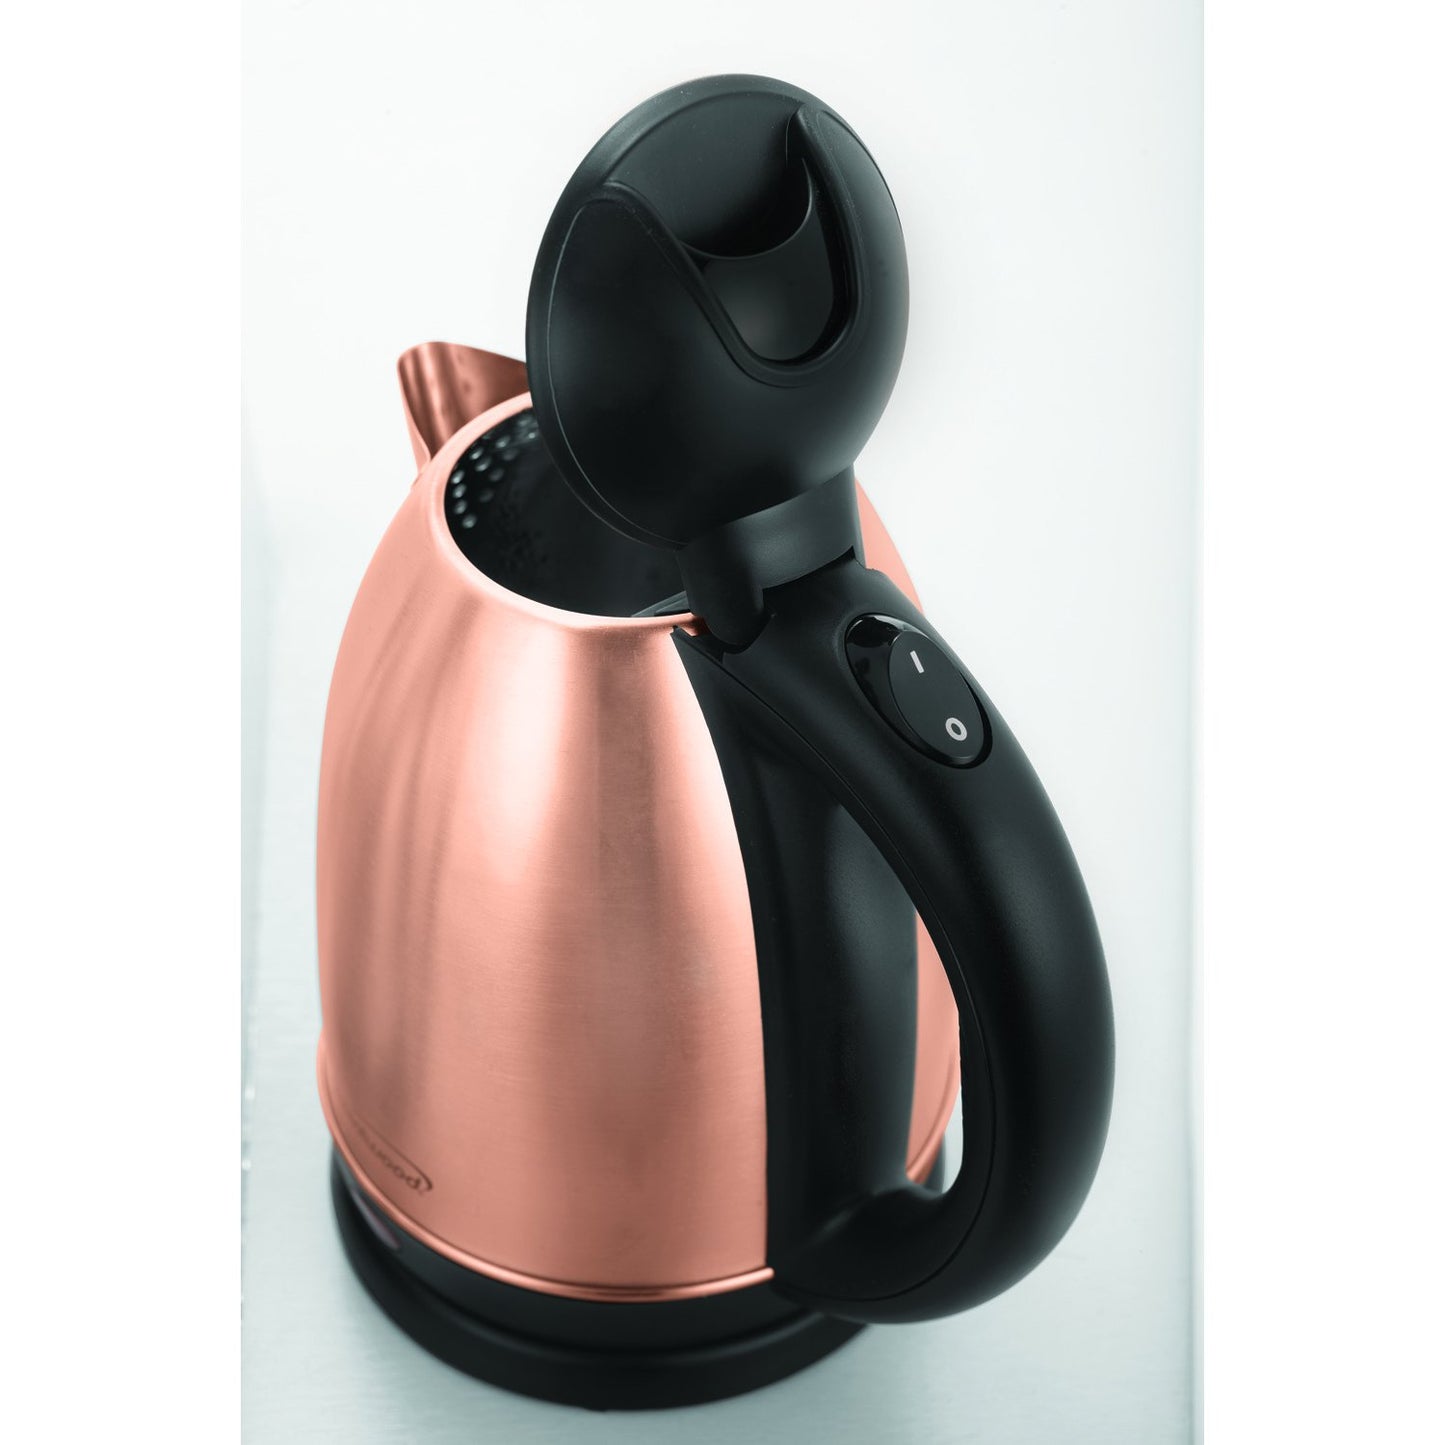 Brentwood Appl. KT-1780RG 1.5L Stainless Steel Cordless Electric Kettle